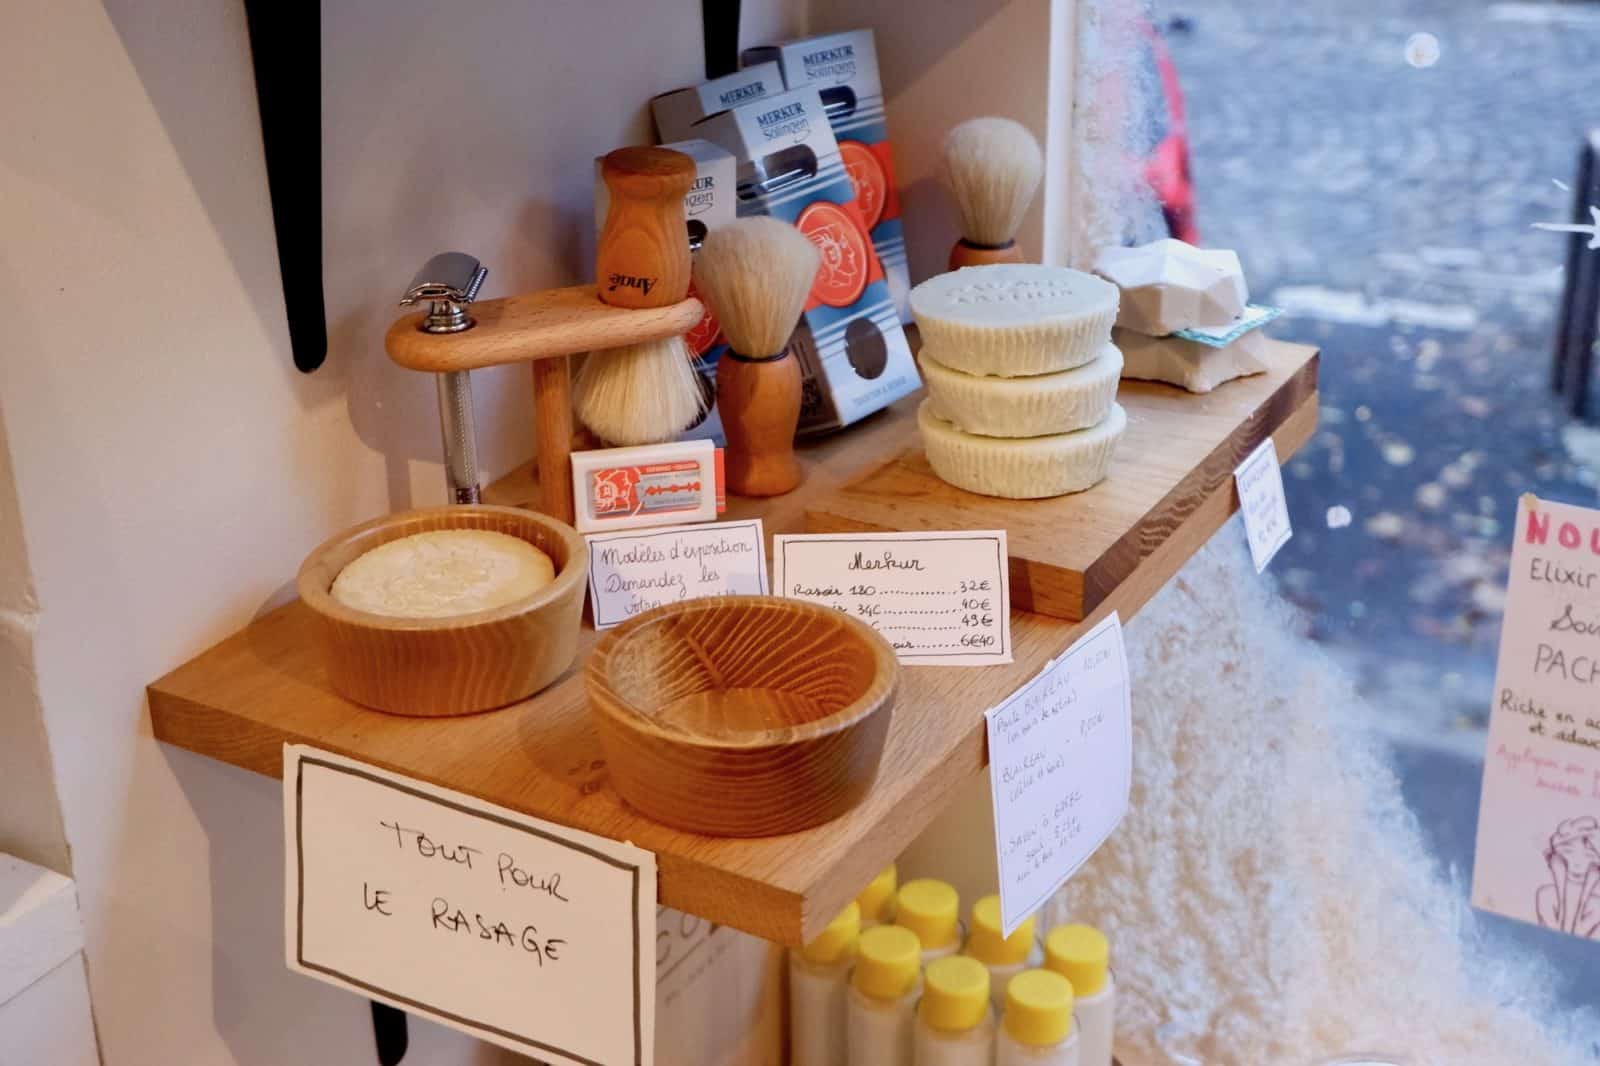 As well as bento boxes, solid shampoo and handmade soaps, the Maison du Zéro Déchet (house of zero waste) also sells wooden shaving kits and other gifts to bring home from Paris.